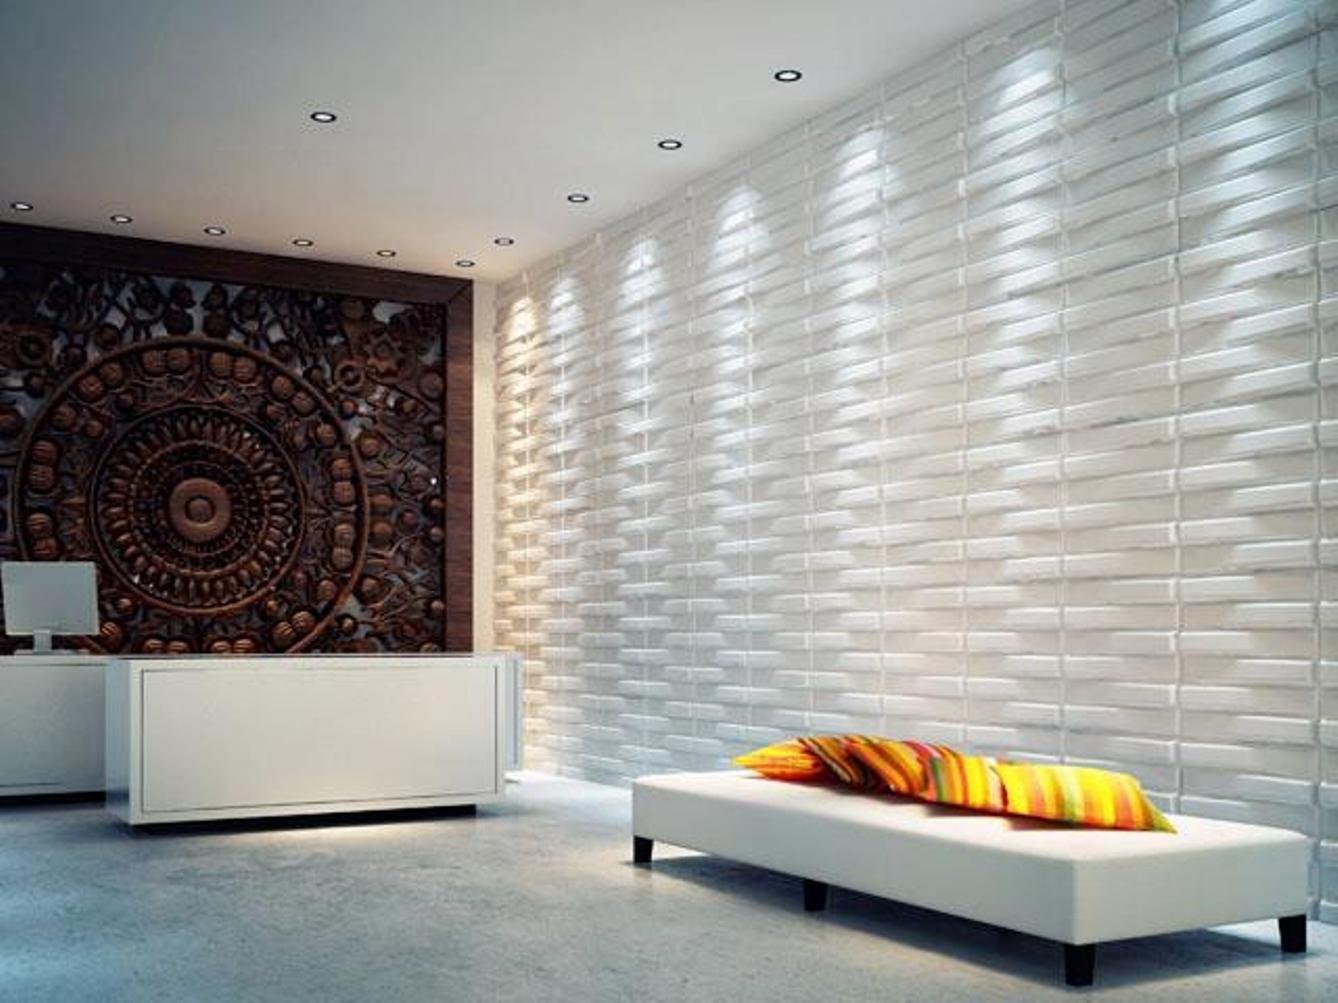 How to Jazz Up Your Home's Interiors with 3D Wall Panels - Go Get Yourself